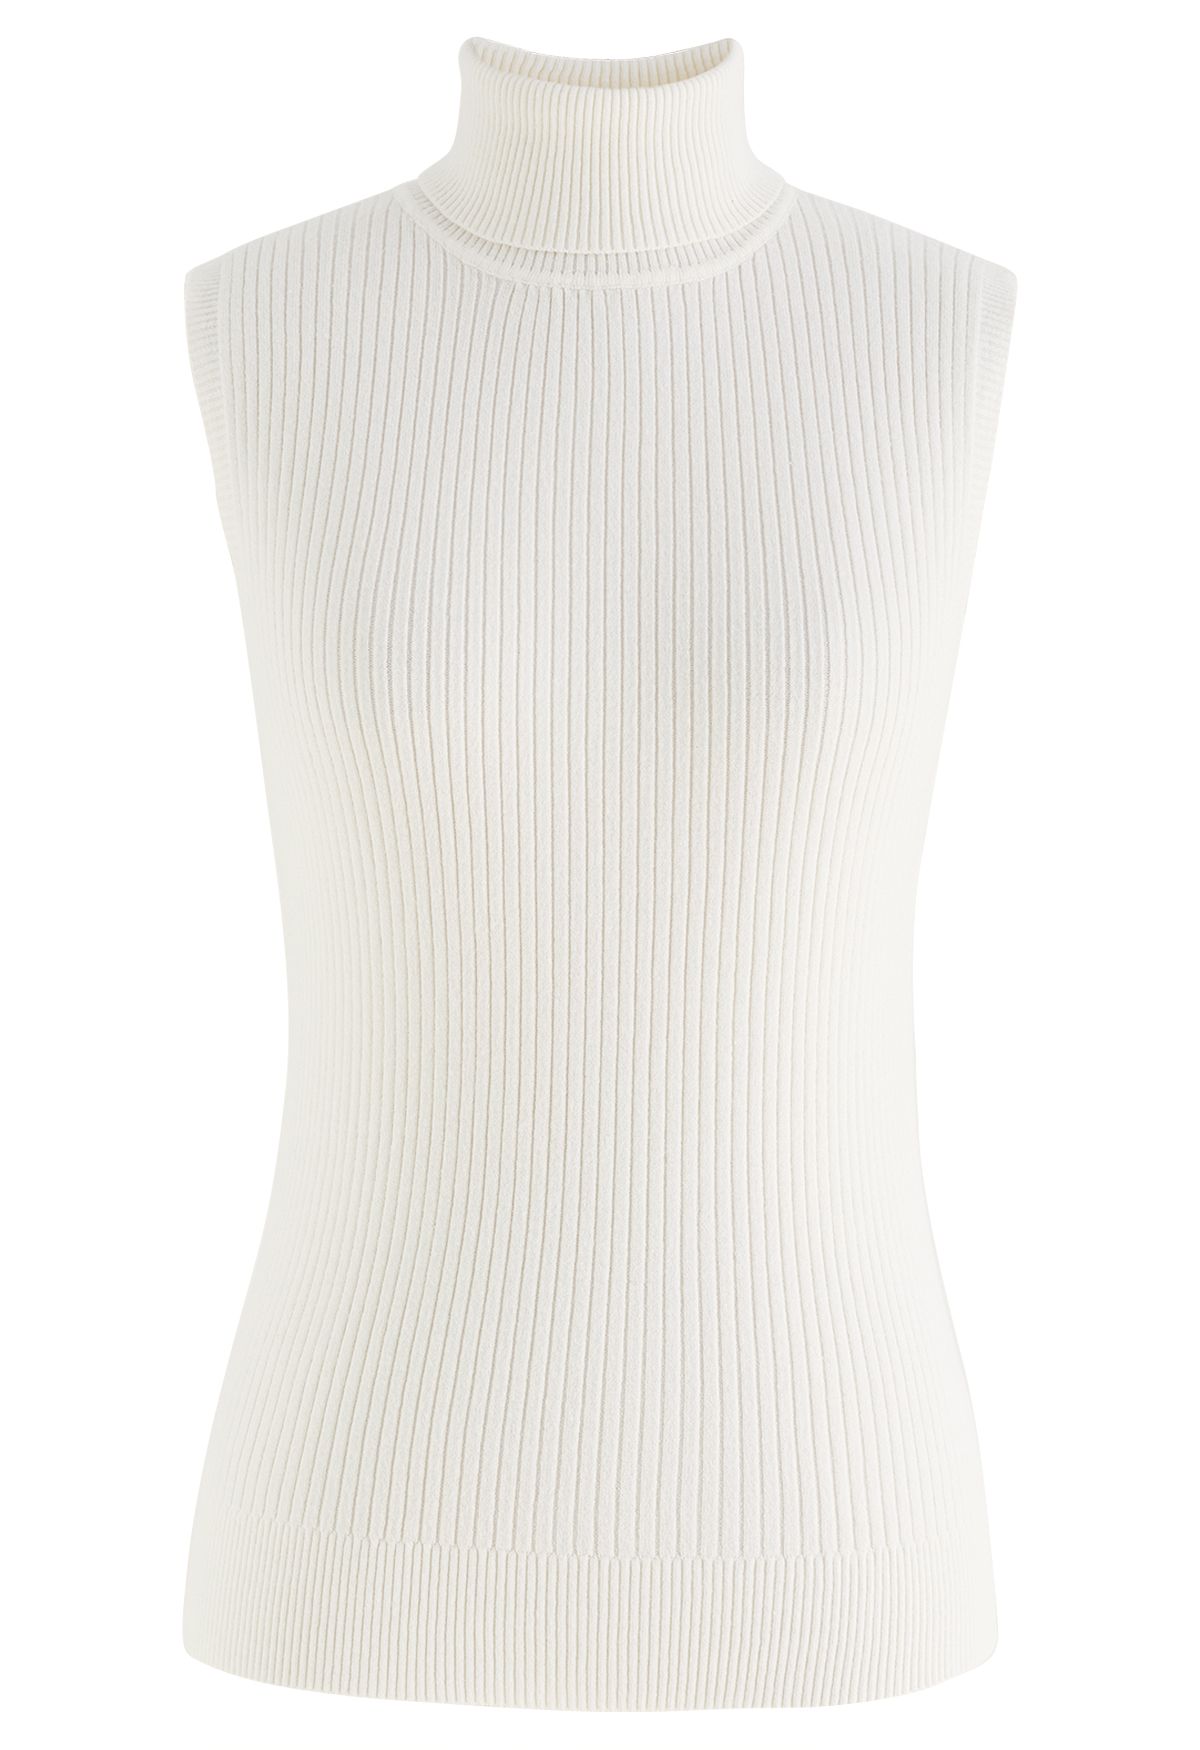 Turtleneck Soft Knit Sleeveless Top in White